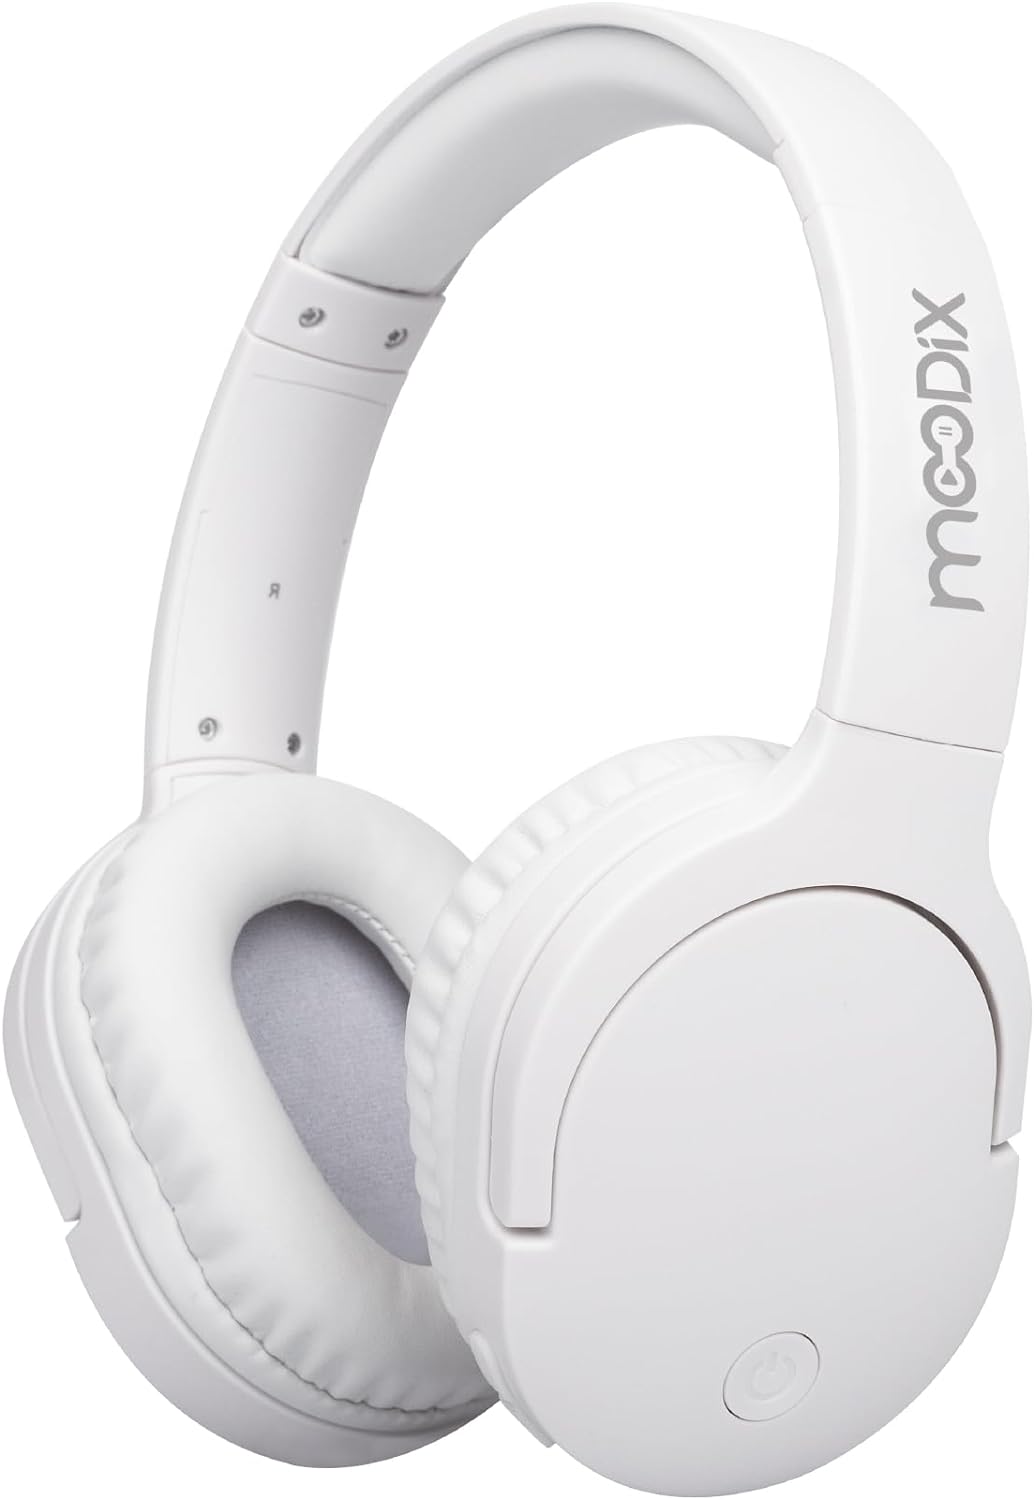 Moodix Bluetooth On-Ear Headphones, iOS and Android Compatible Wireless Headphones, Lightweight Over-Ear Loud Headphones with Deep Bass, Black (White)